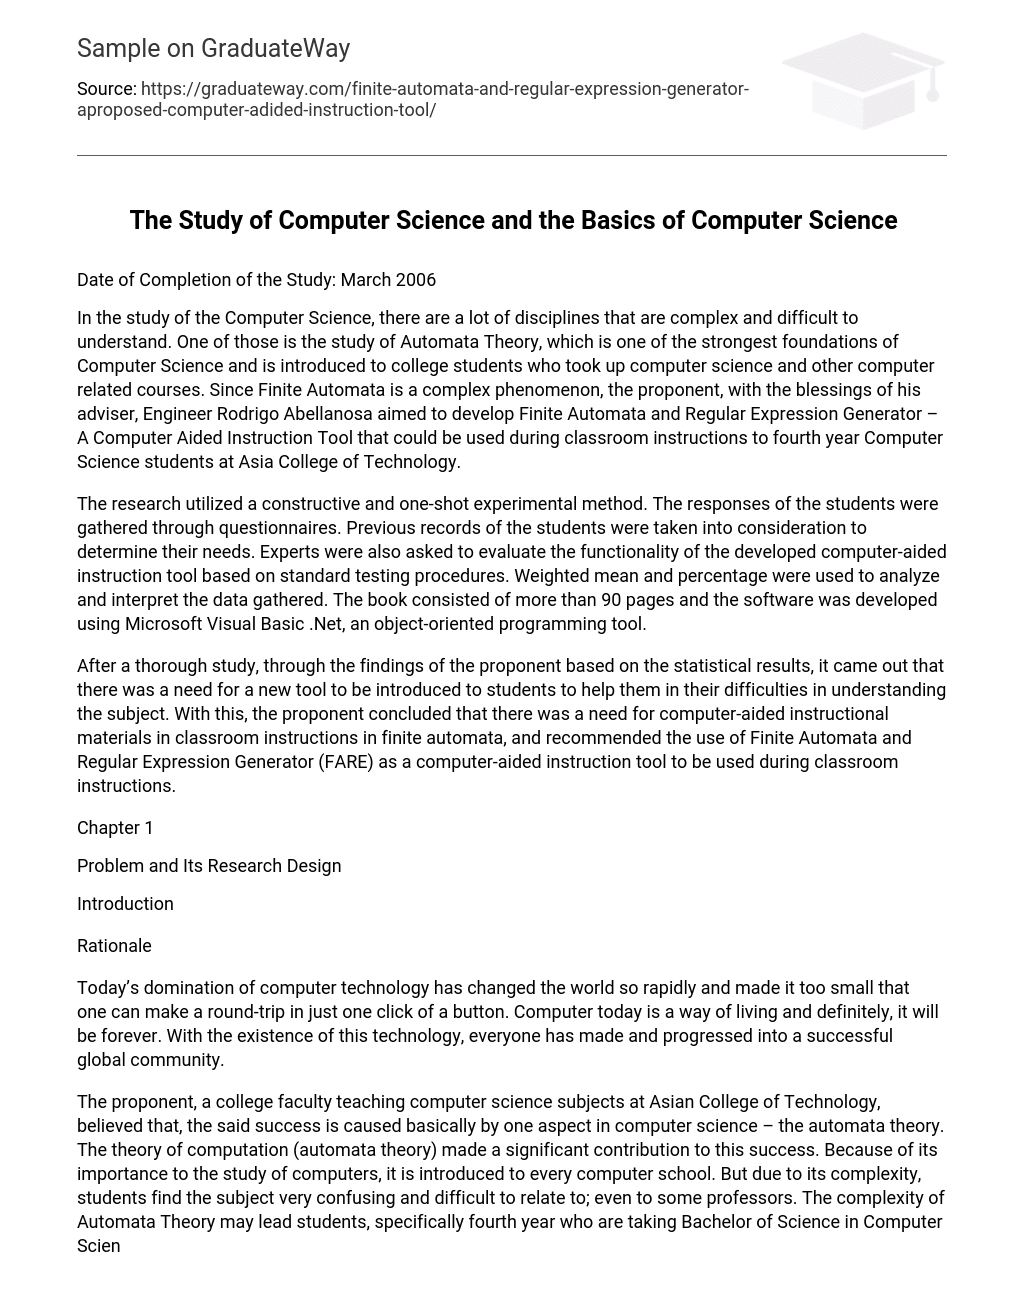 The Study of Computer Science and the Basics of Computer Science